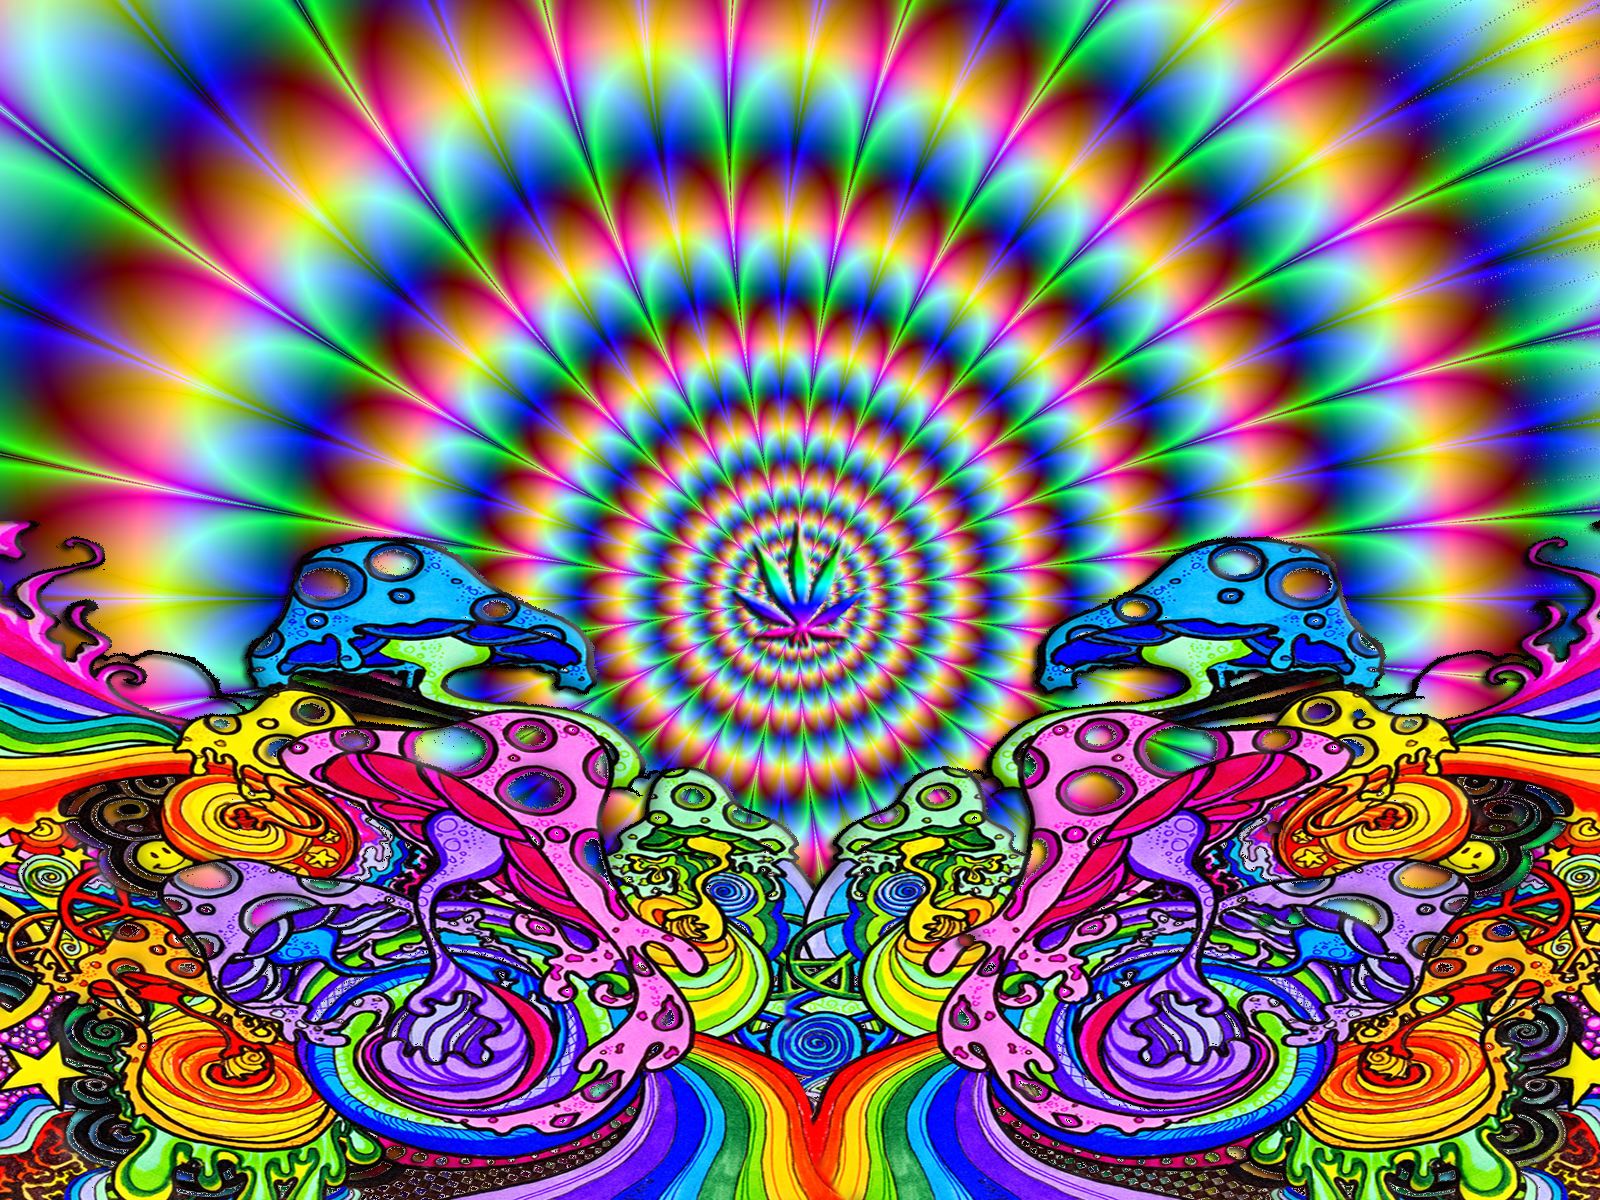 50+ Trippy Backgrounds Wallpapers & Psychedelic Wallpapers Pictures.